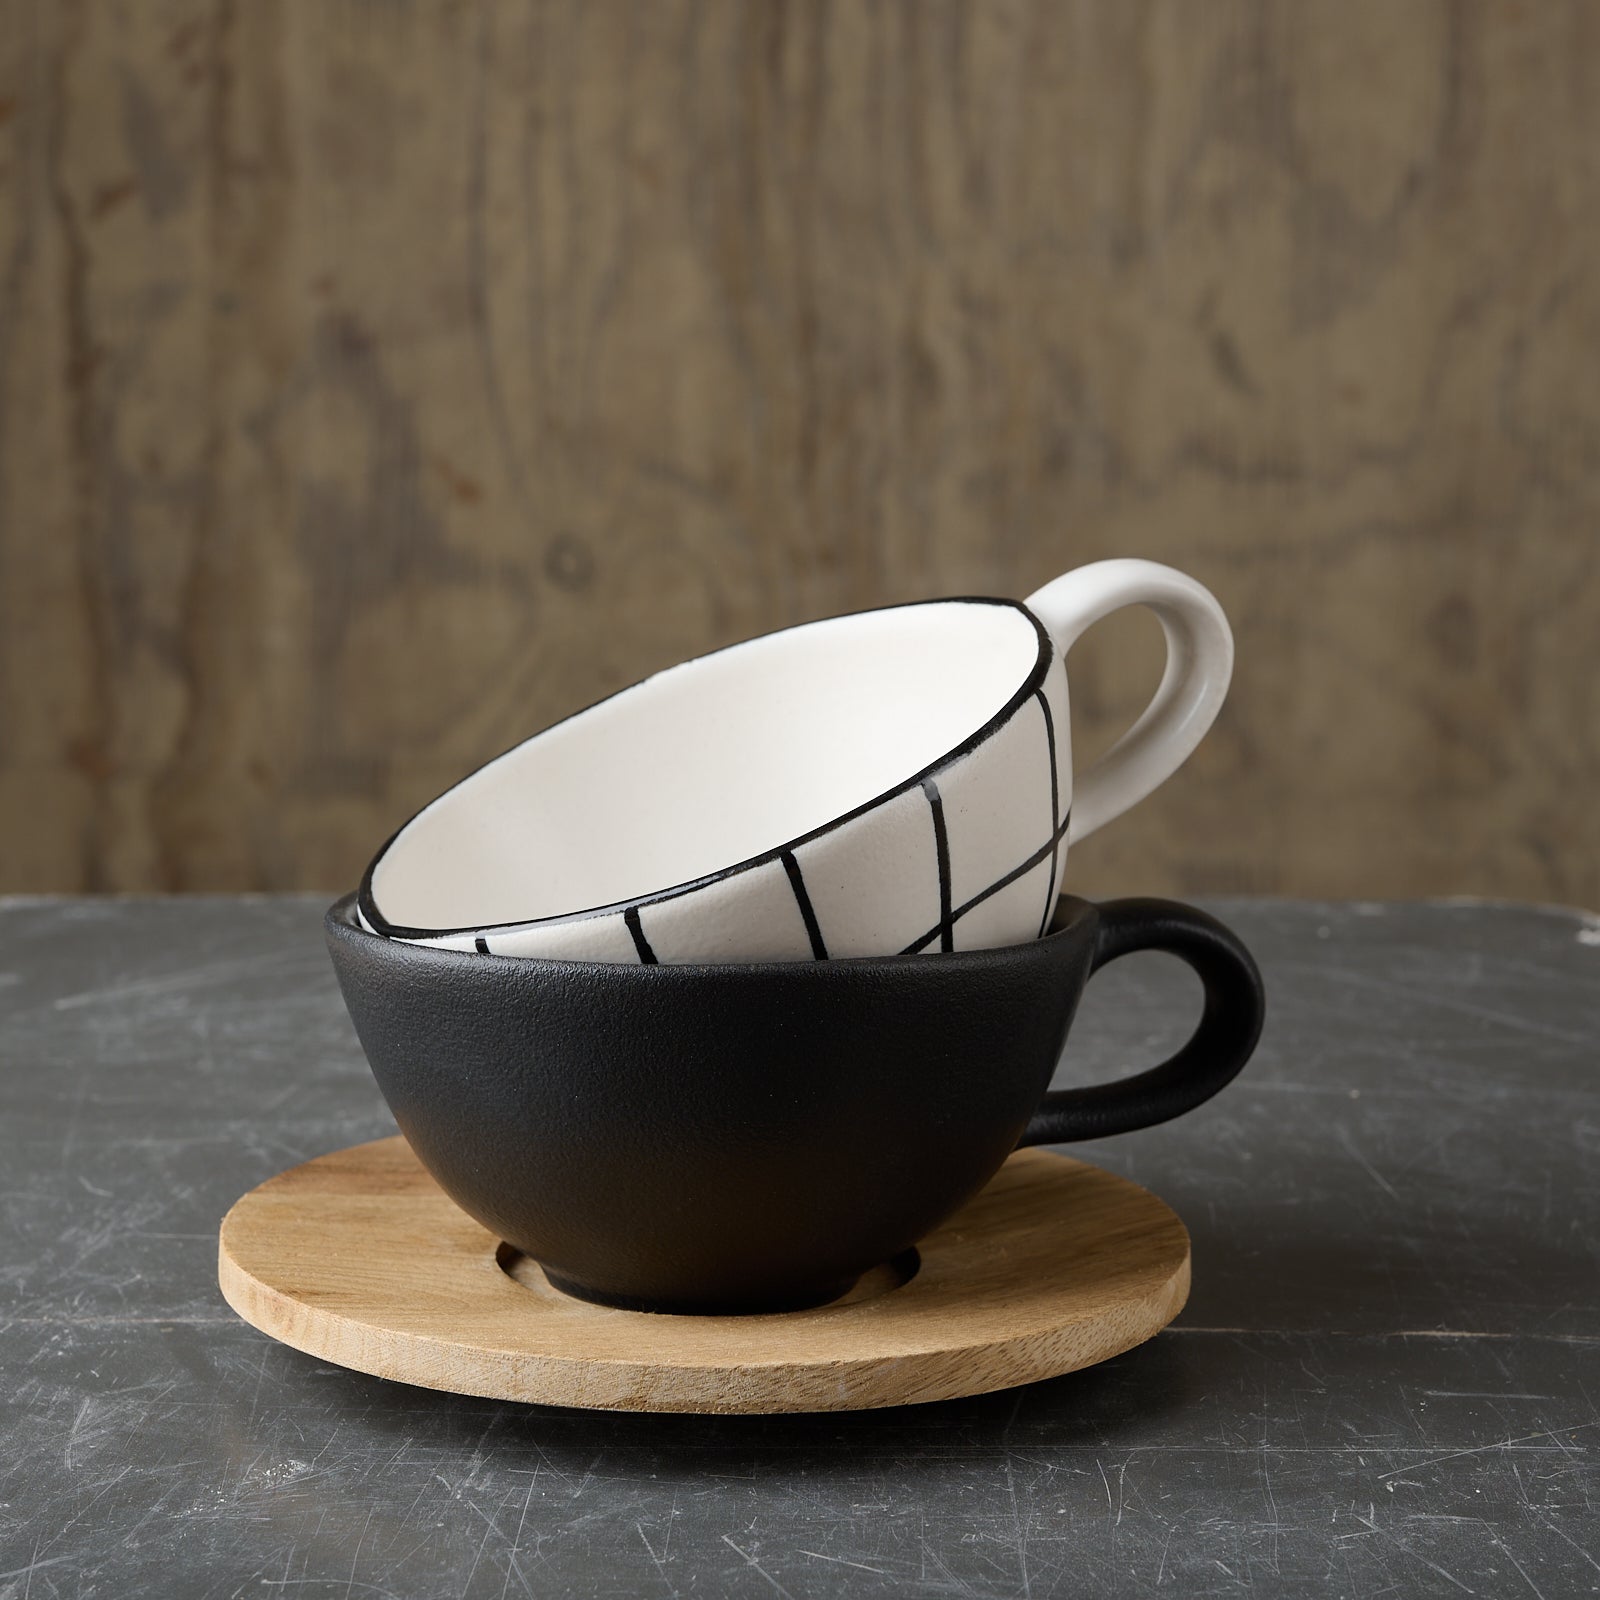 MDC Wonky Cup w/ Wood Saucer